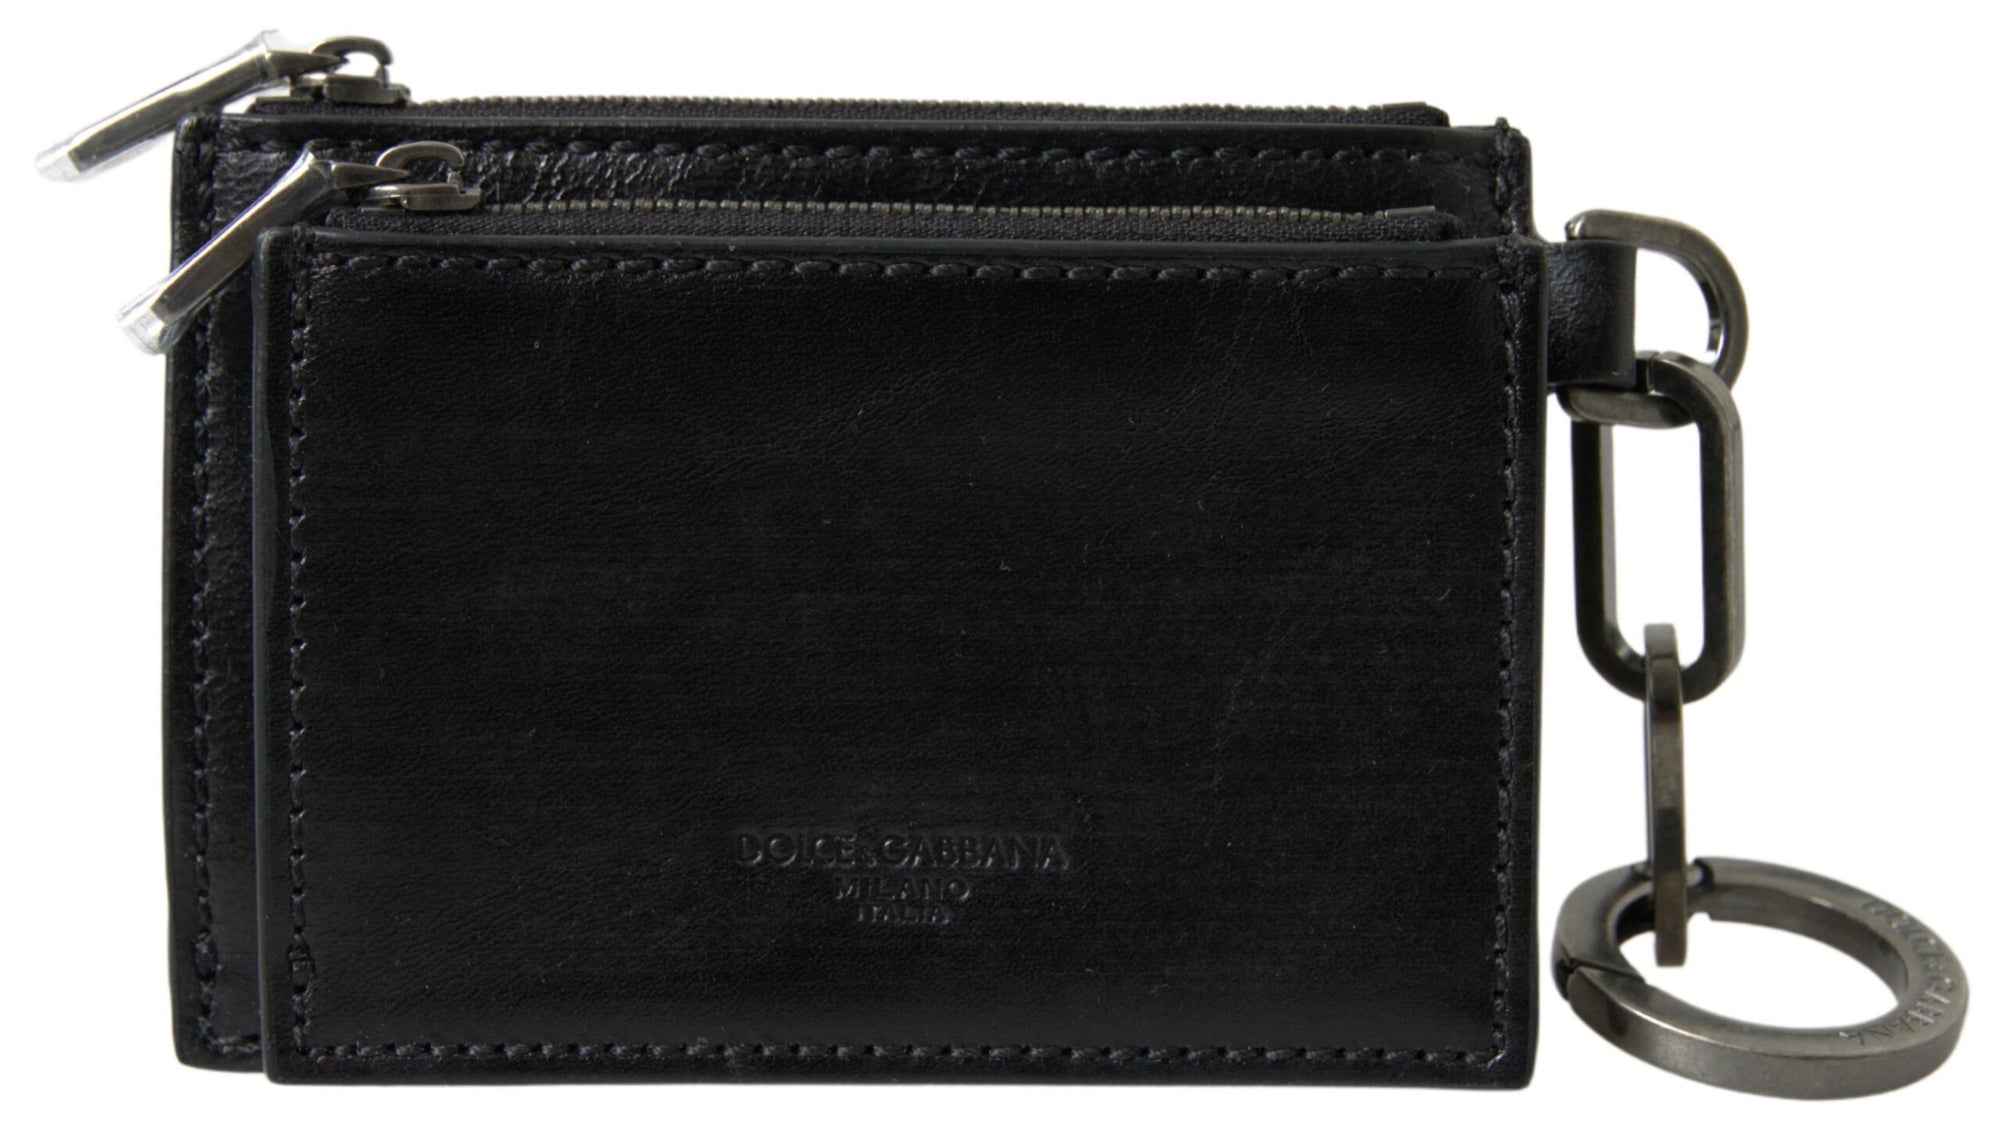 Elegant Leather Coin Purse Wallet